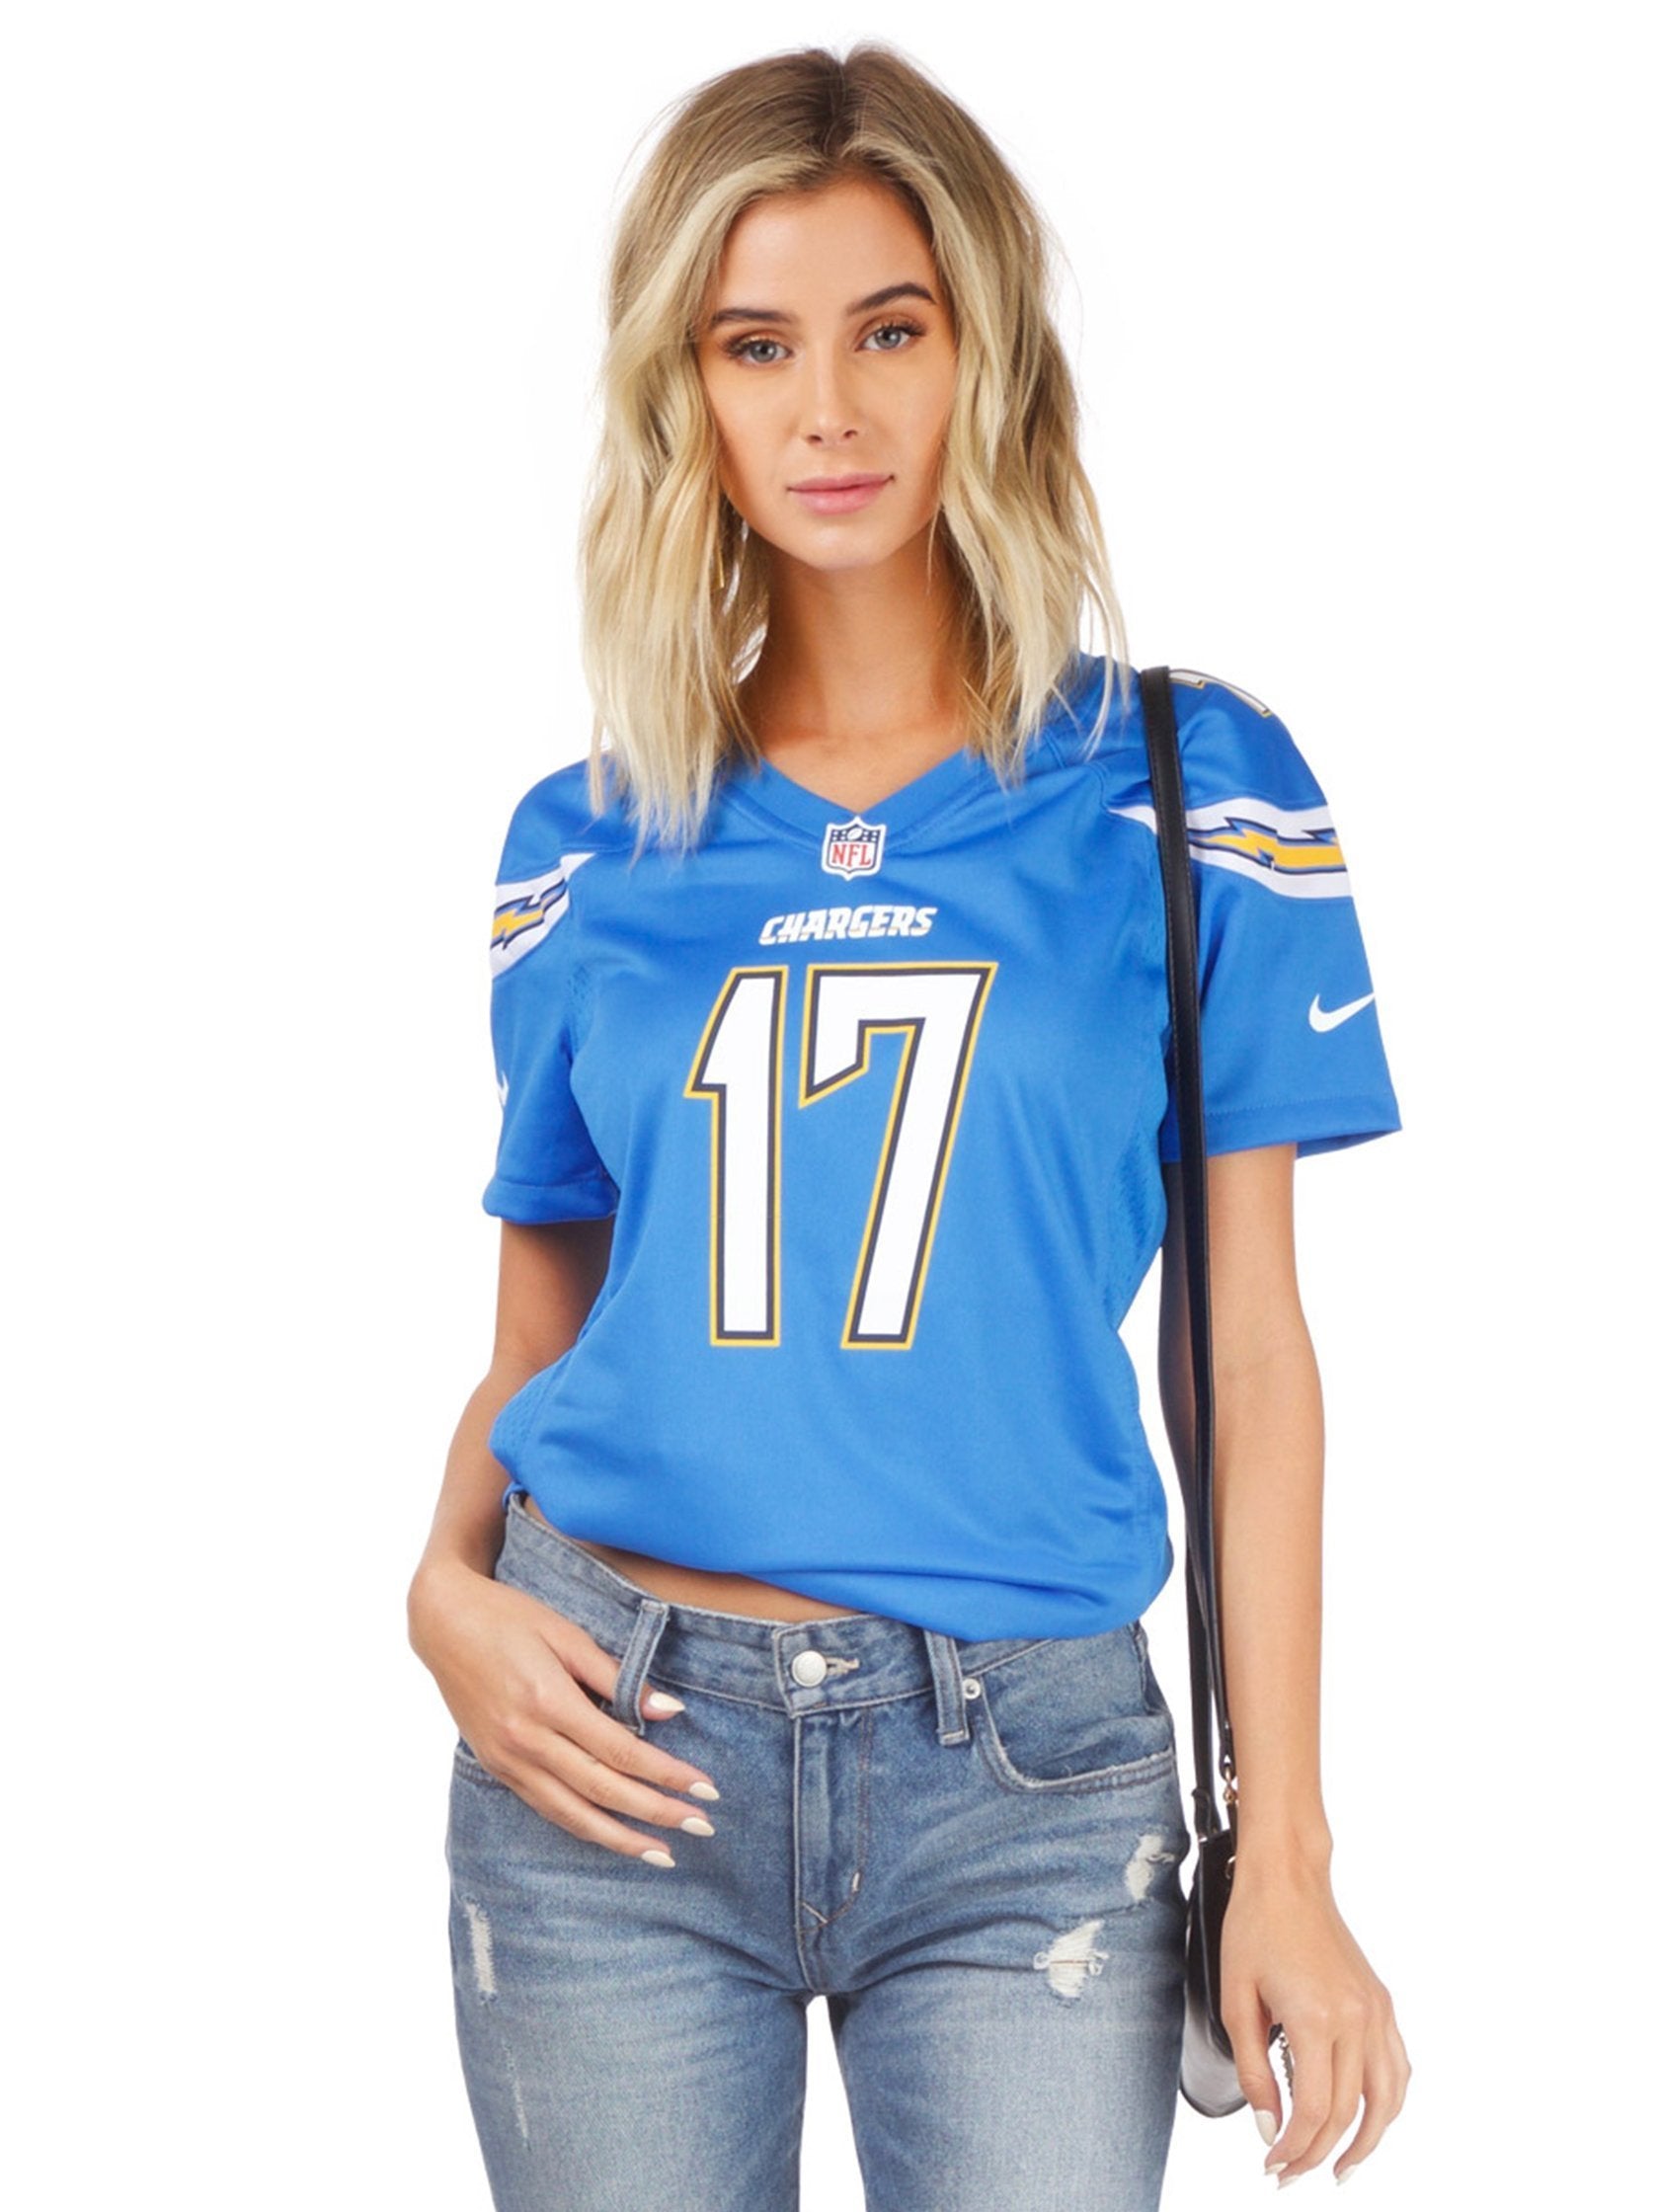 Woman wearing a top rental from FashionPass called La Chargers Jersey